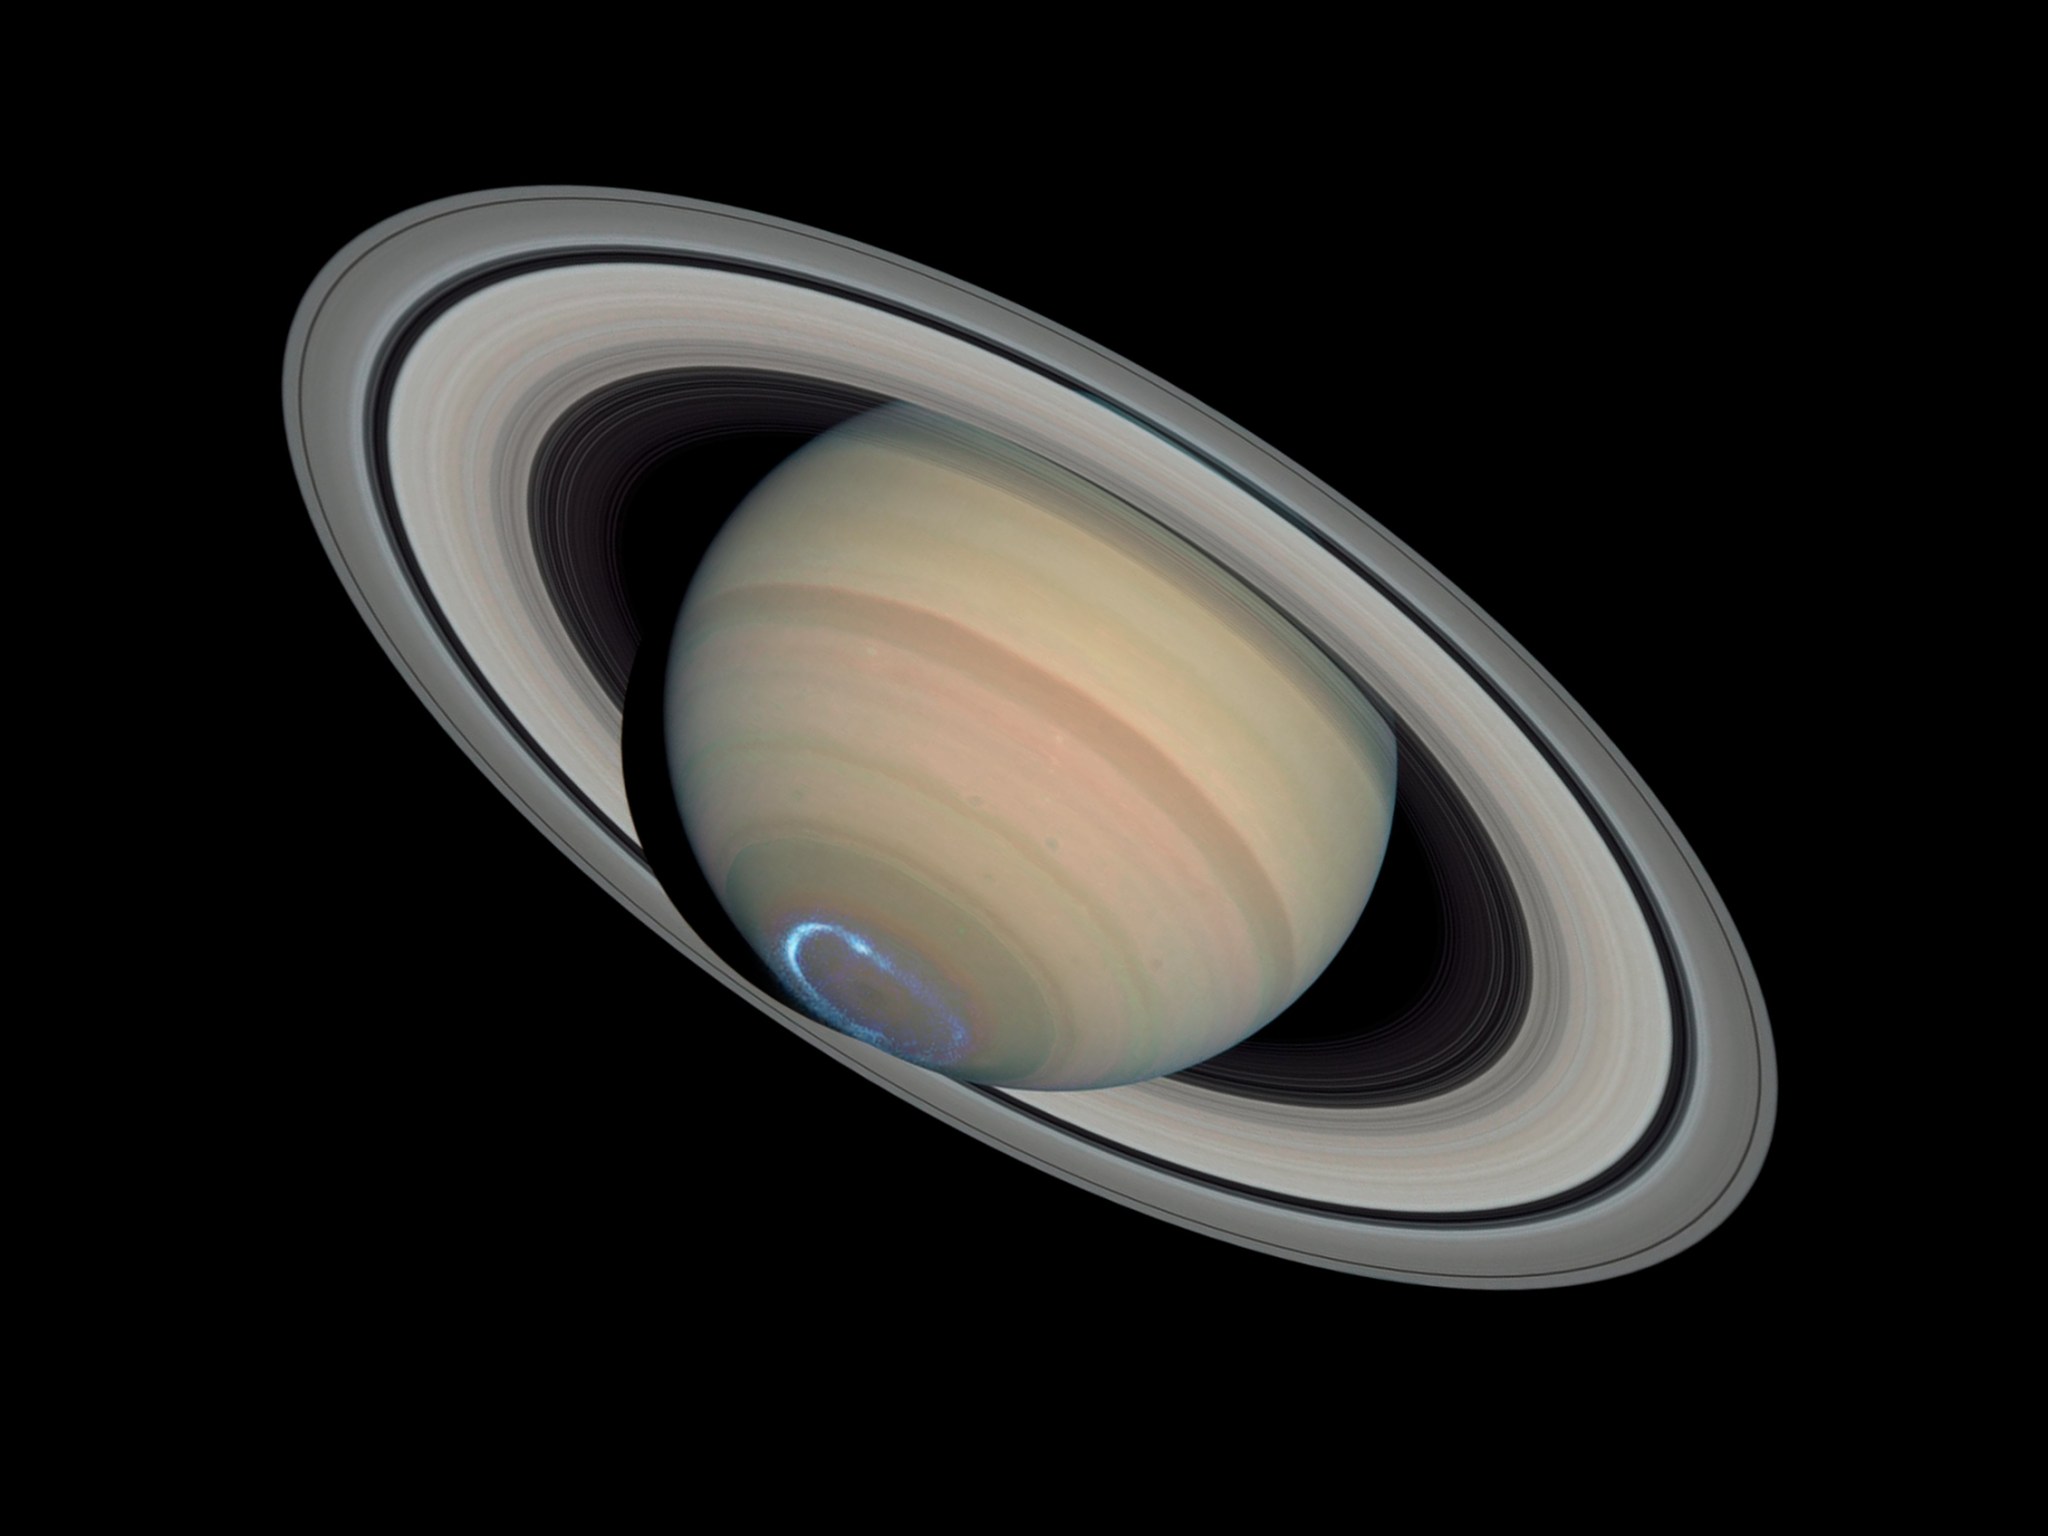 Saturn experiences auroras, also known as northern and southern lights, just like Earth.